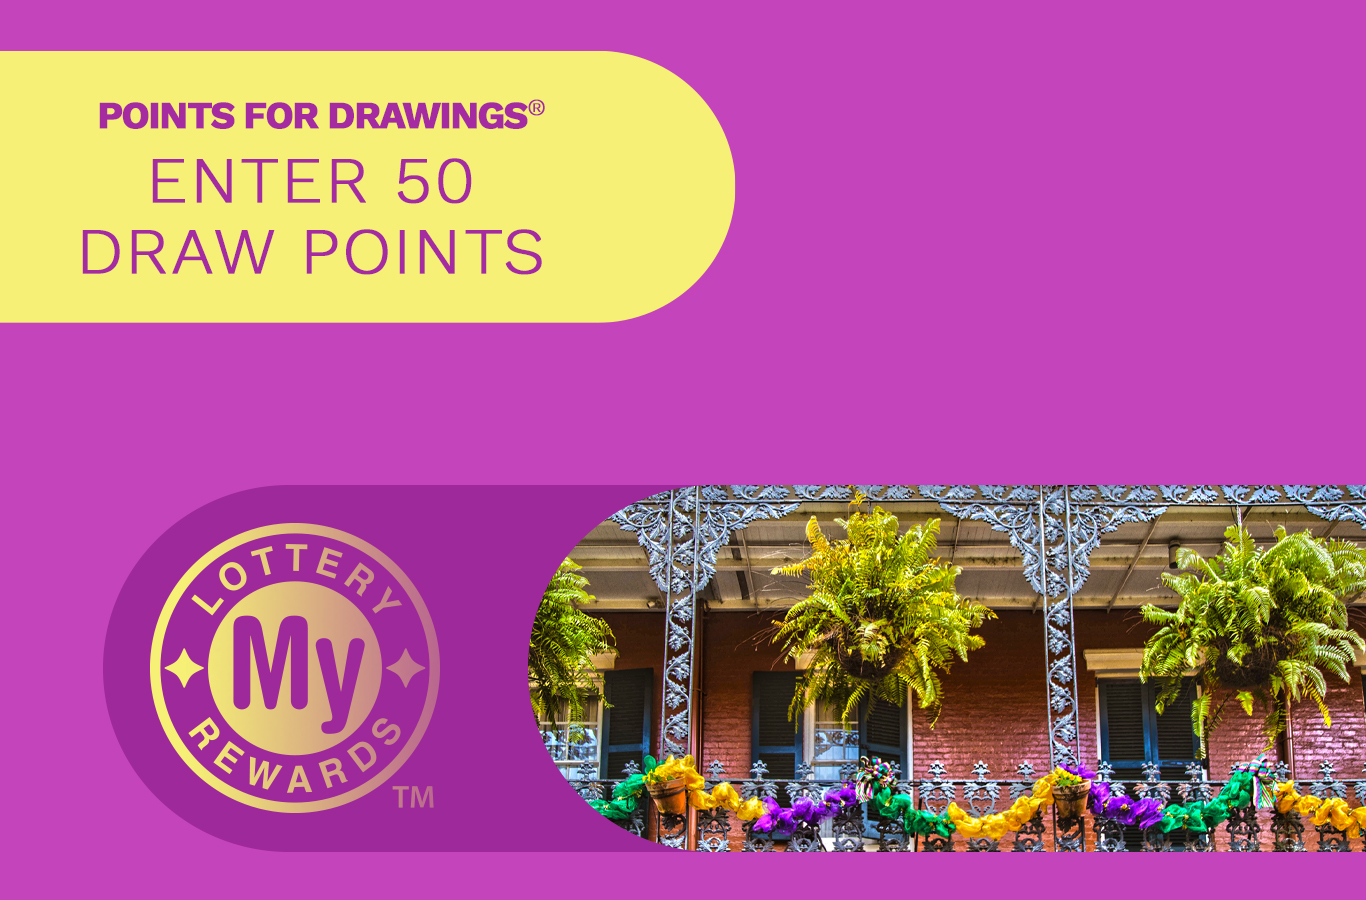 Here's your chance to win a New Orleans Vacation! Enter by Monday, April 3rd.